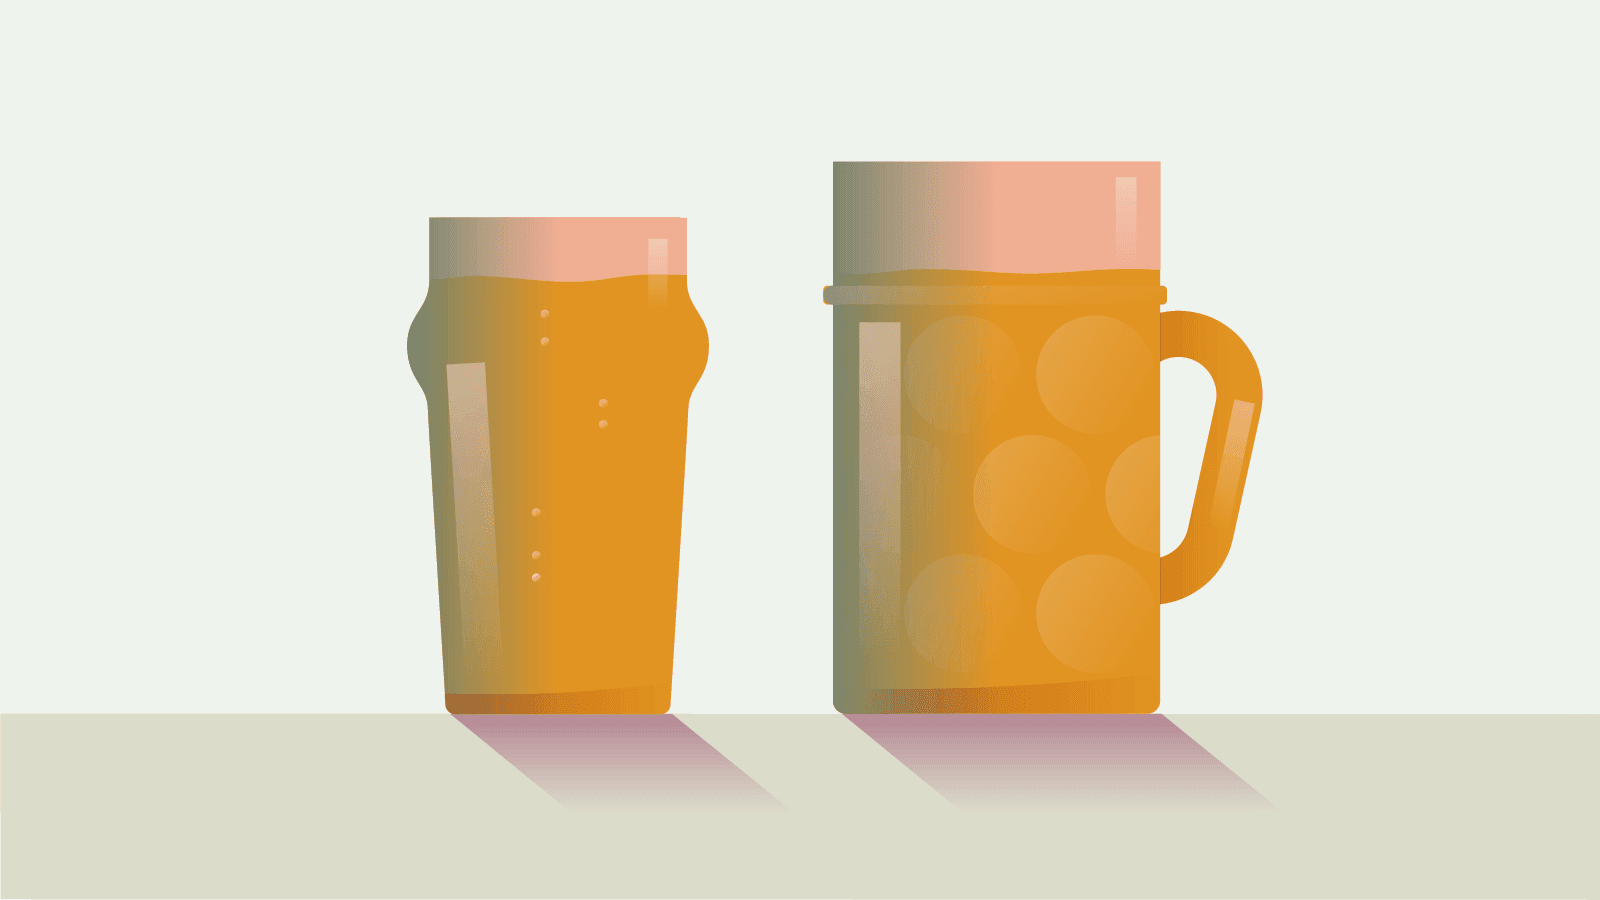 How do you measure the alcohol in your drink? The idea of a "standard" drink can be helpful.